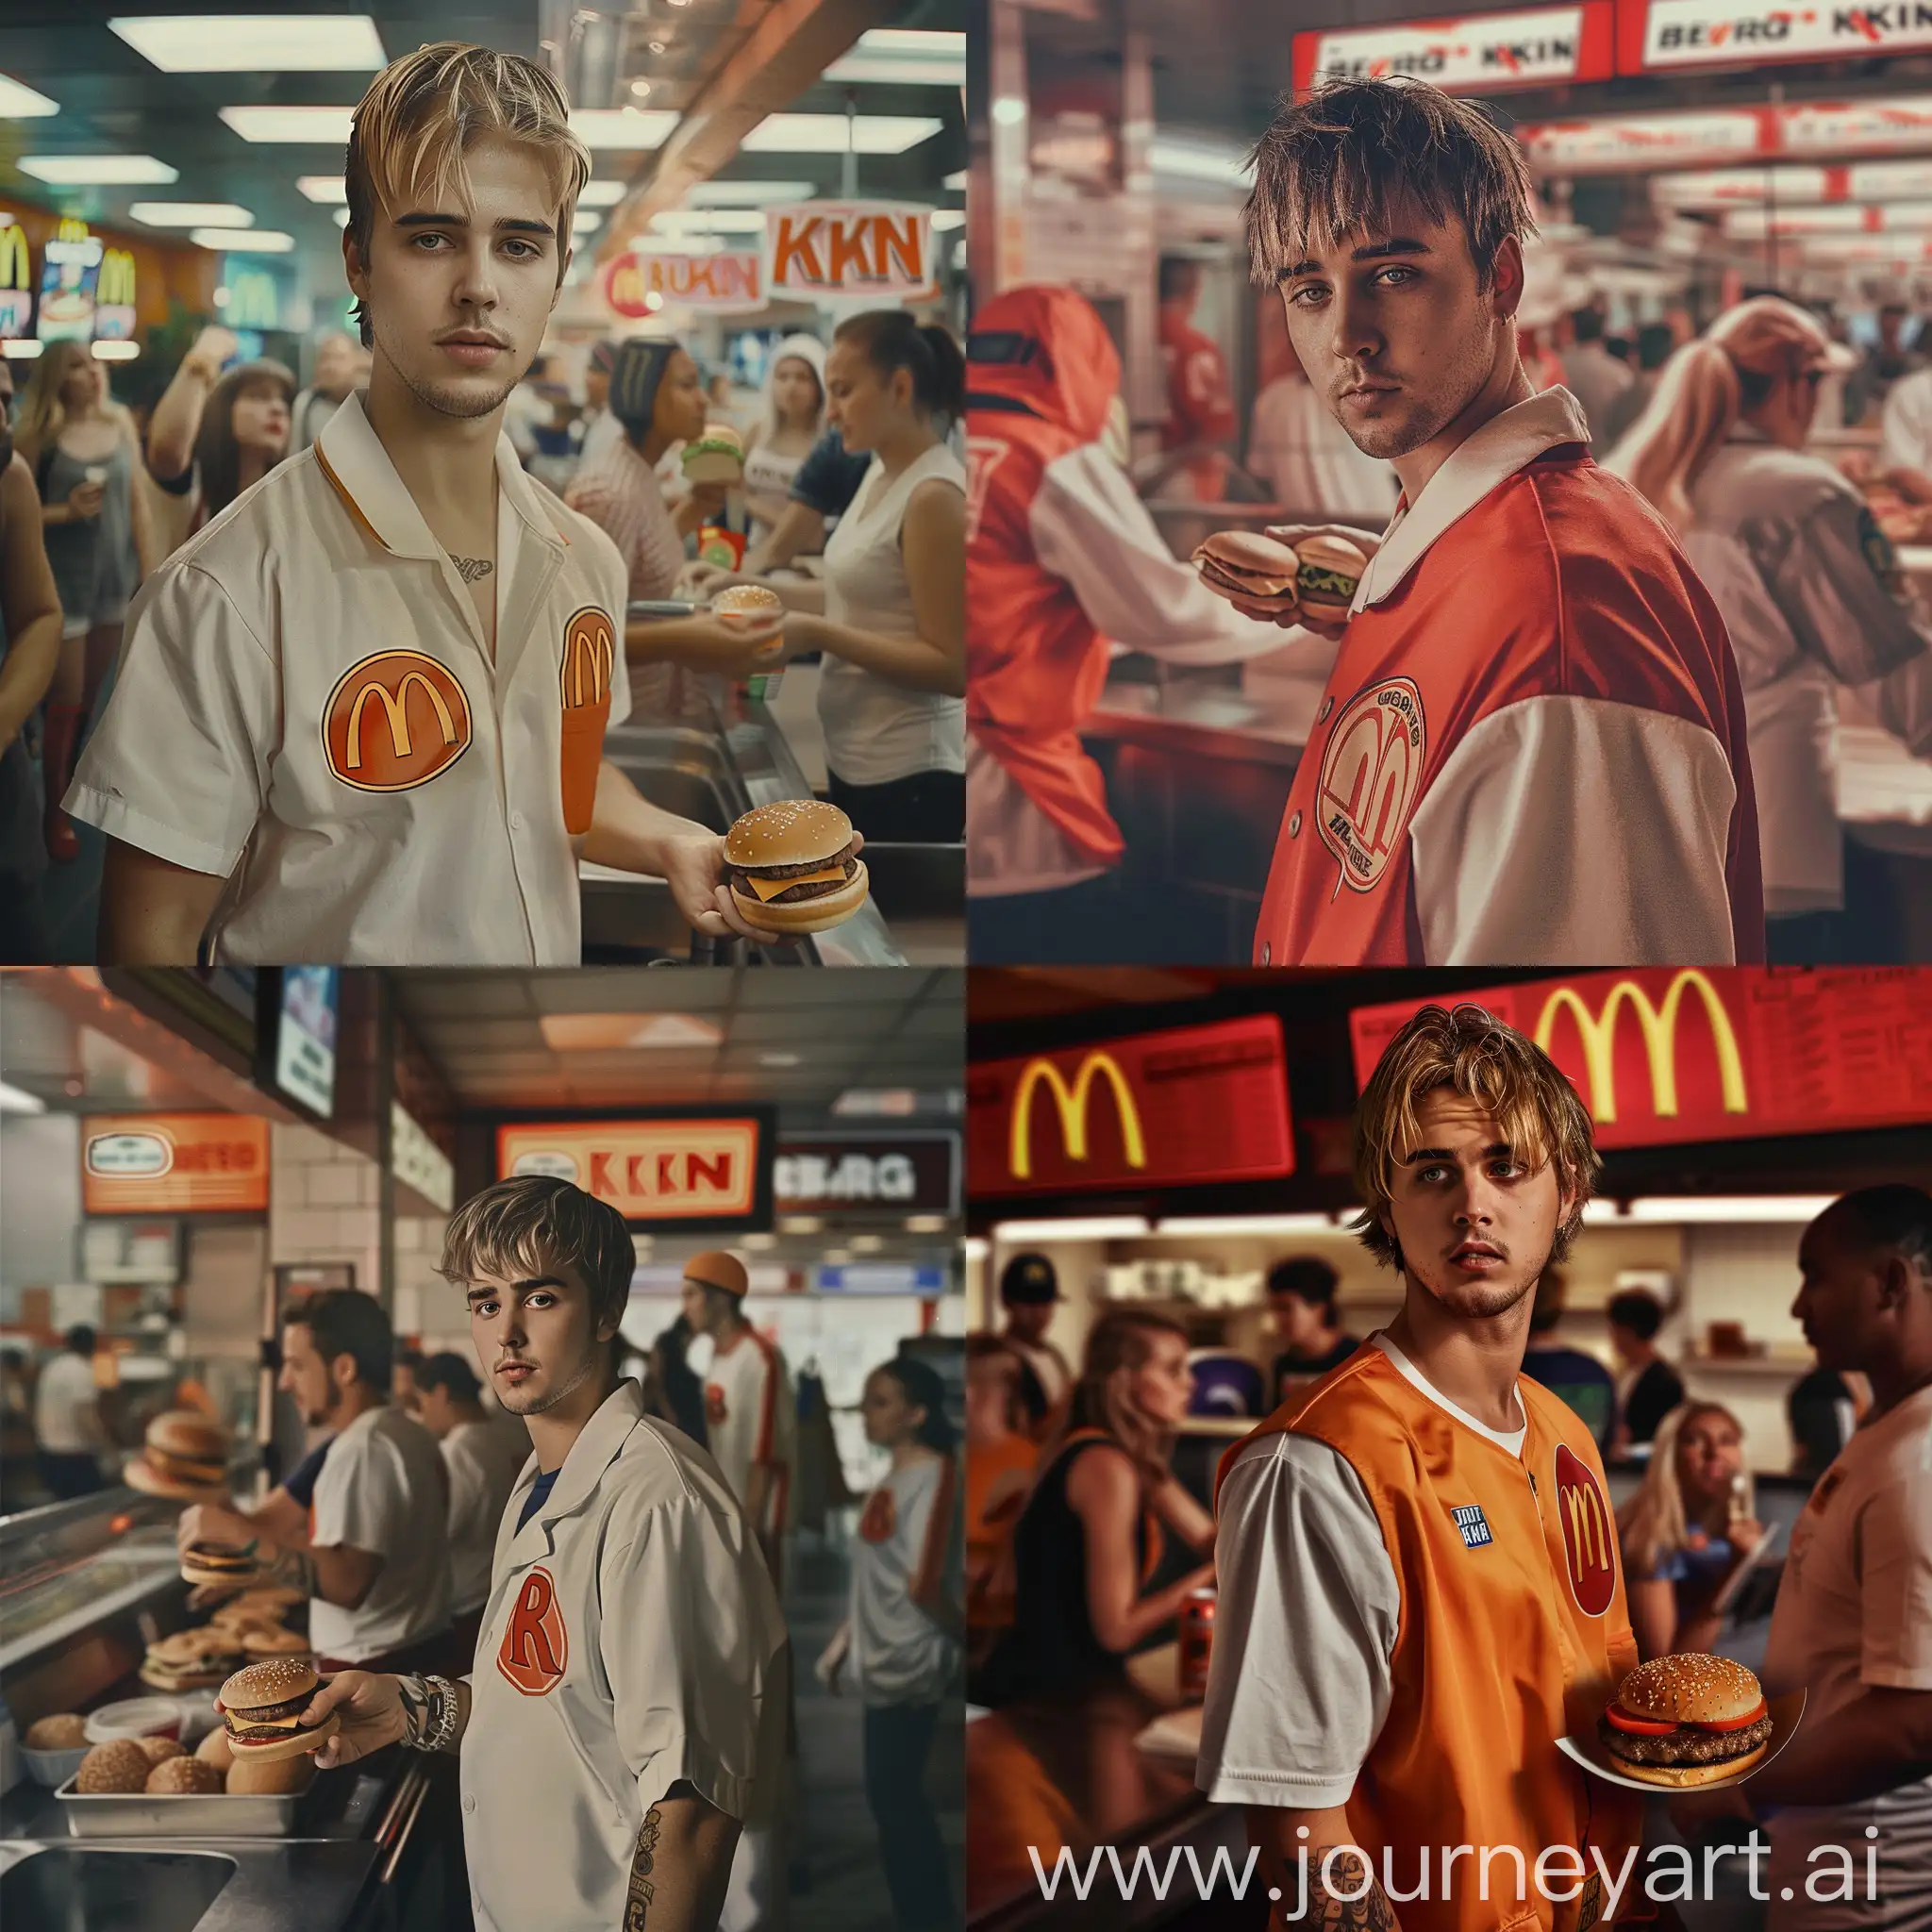 A hyperrealistic photograph of Justin Bieber in a Burger King uniform, serving burger customer, captured in a cinematic shot that perfectly captures the hustle and bustle of a busy fast food restaurant,